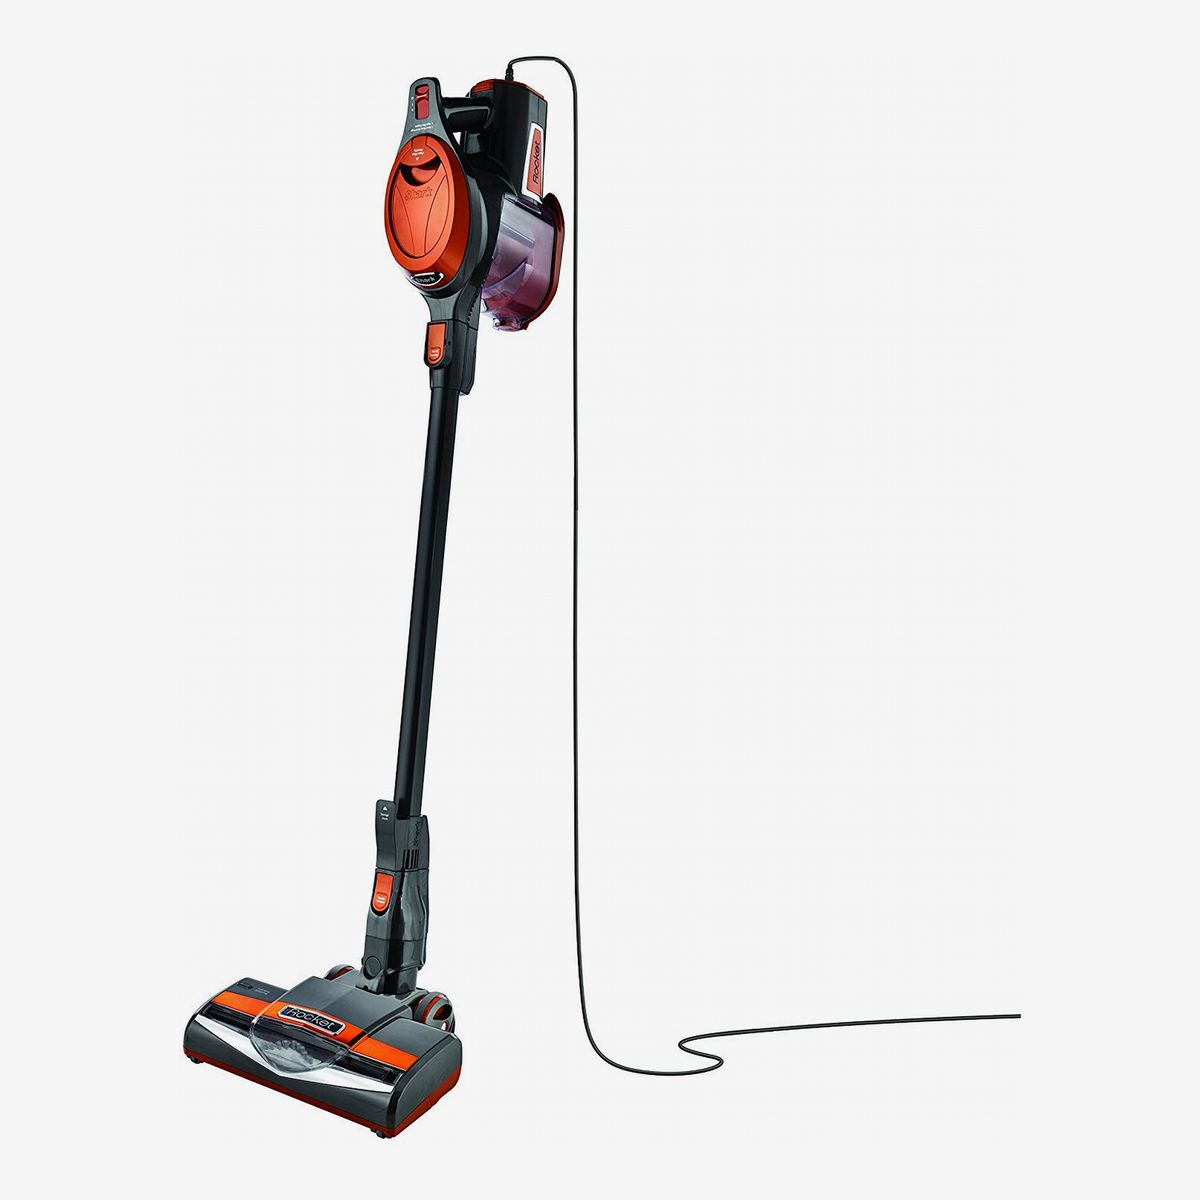 18 Best Vacuums For Pet Hair 2022 The, Best Stick Vacuum For Pet Hair And Hardwood Floors